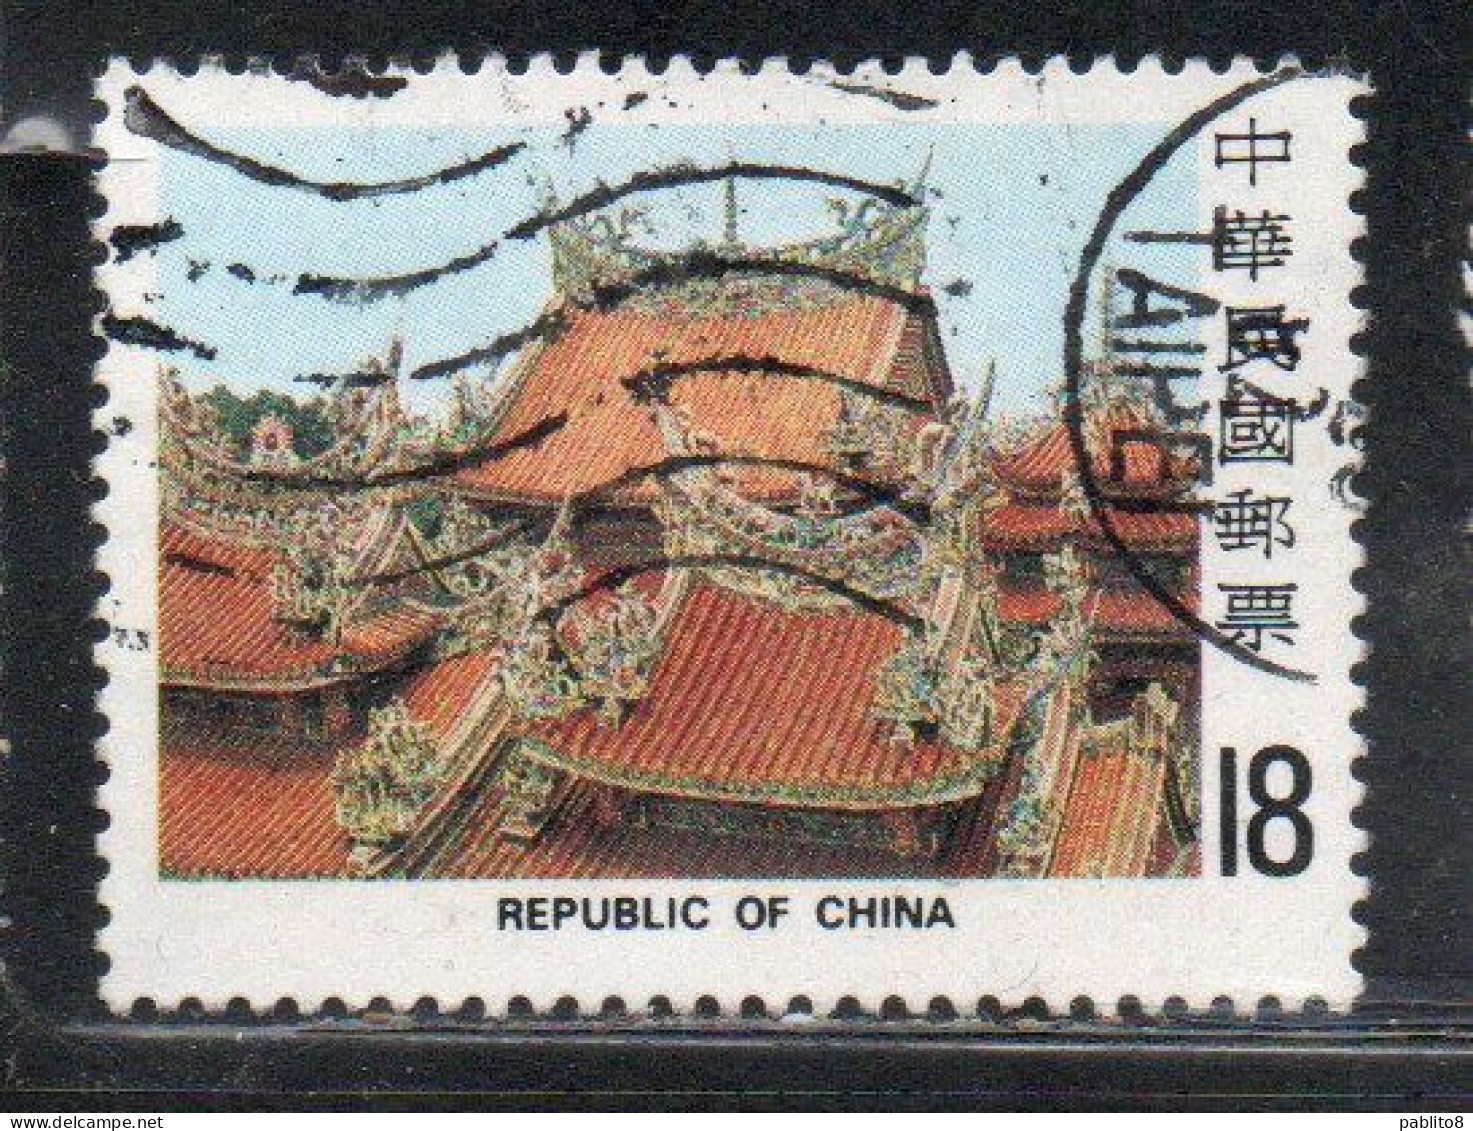 CHINA REPUBLIC CINA TAIWAN FORMOSA 1982 TSU SHIH TEMPLE OF SANHSIA ARCHITECTURE TILED ROOF 18$ USED USATO OBLITERE' - Used Stamps